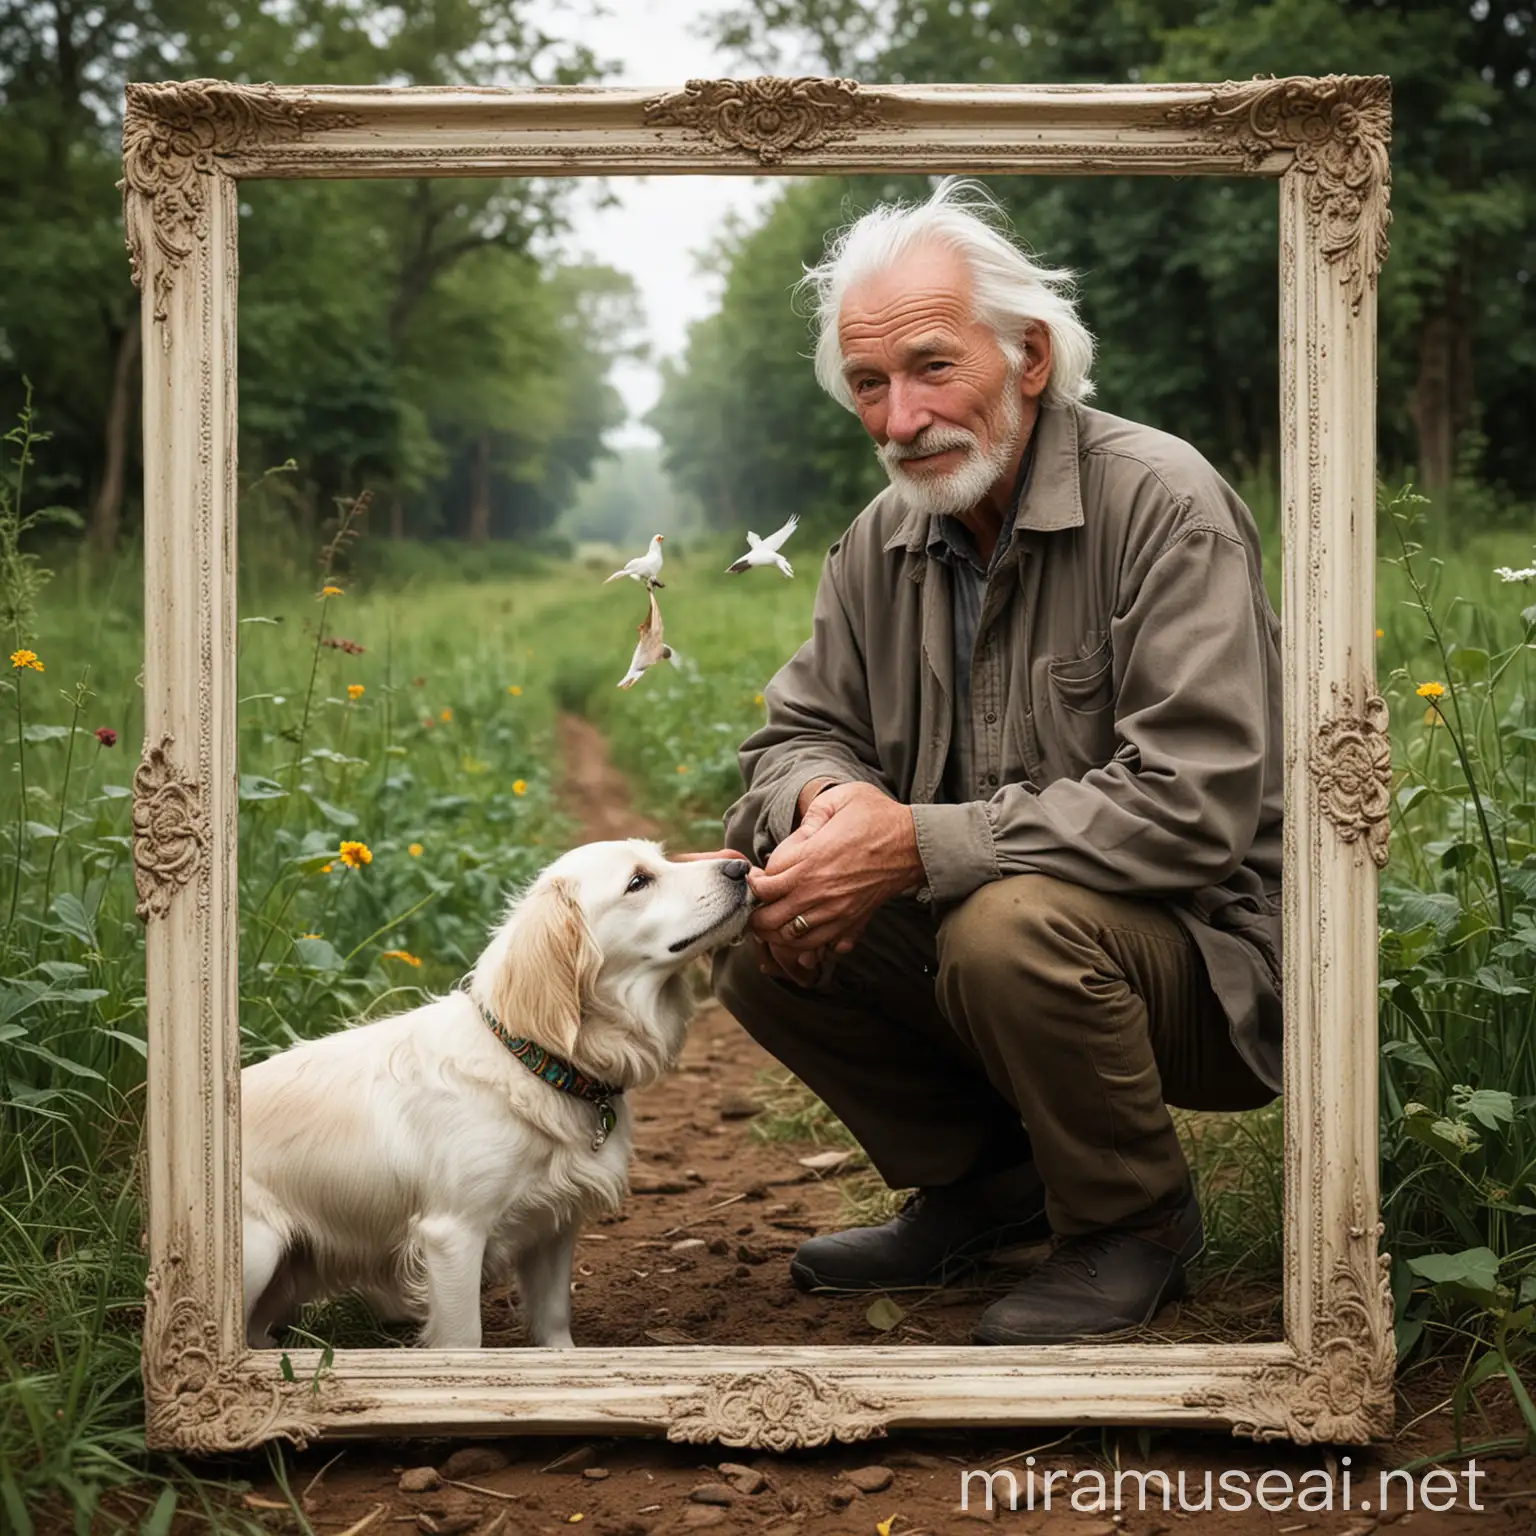 Elderly Man in a Field with Dog and Bird Frame